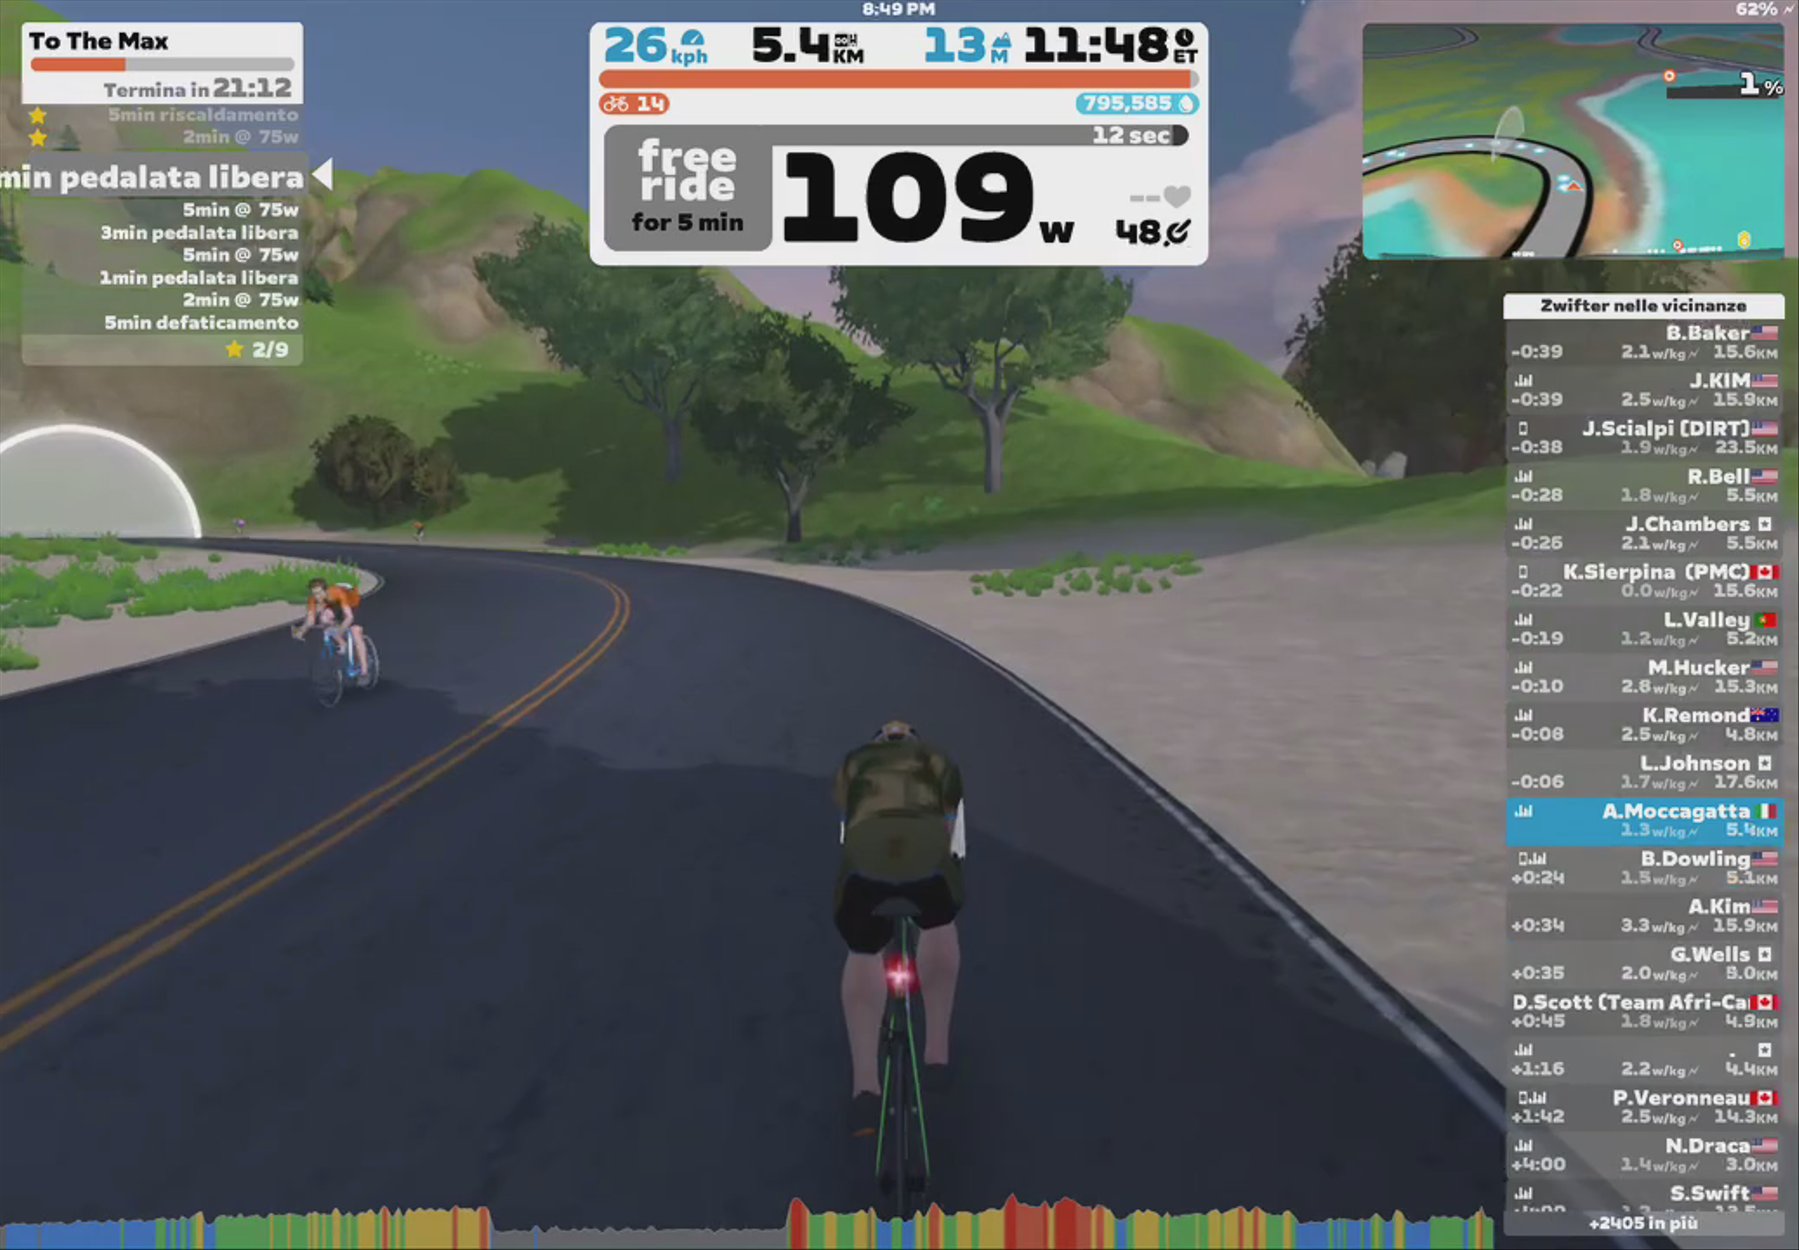 Zwift - To The Max in Watopia